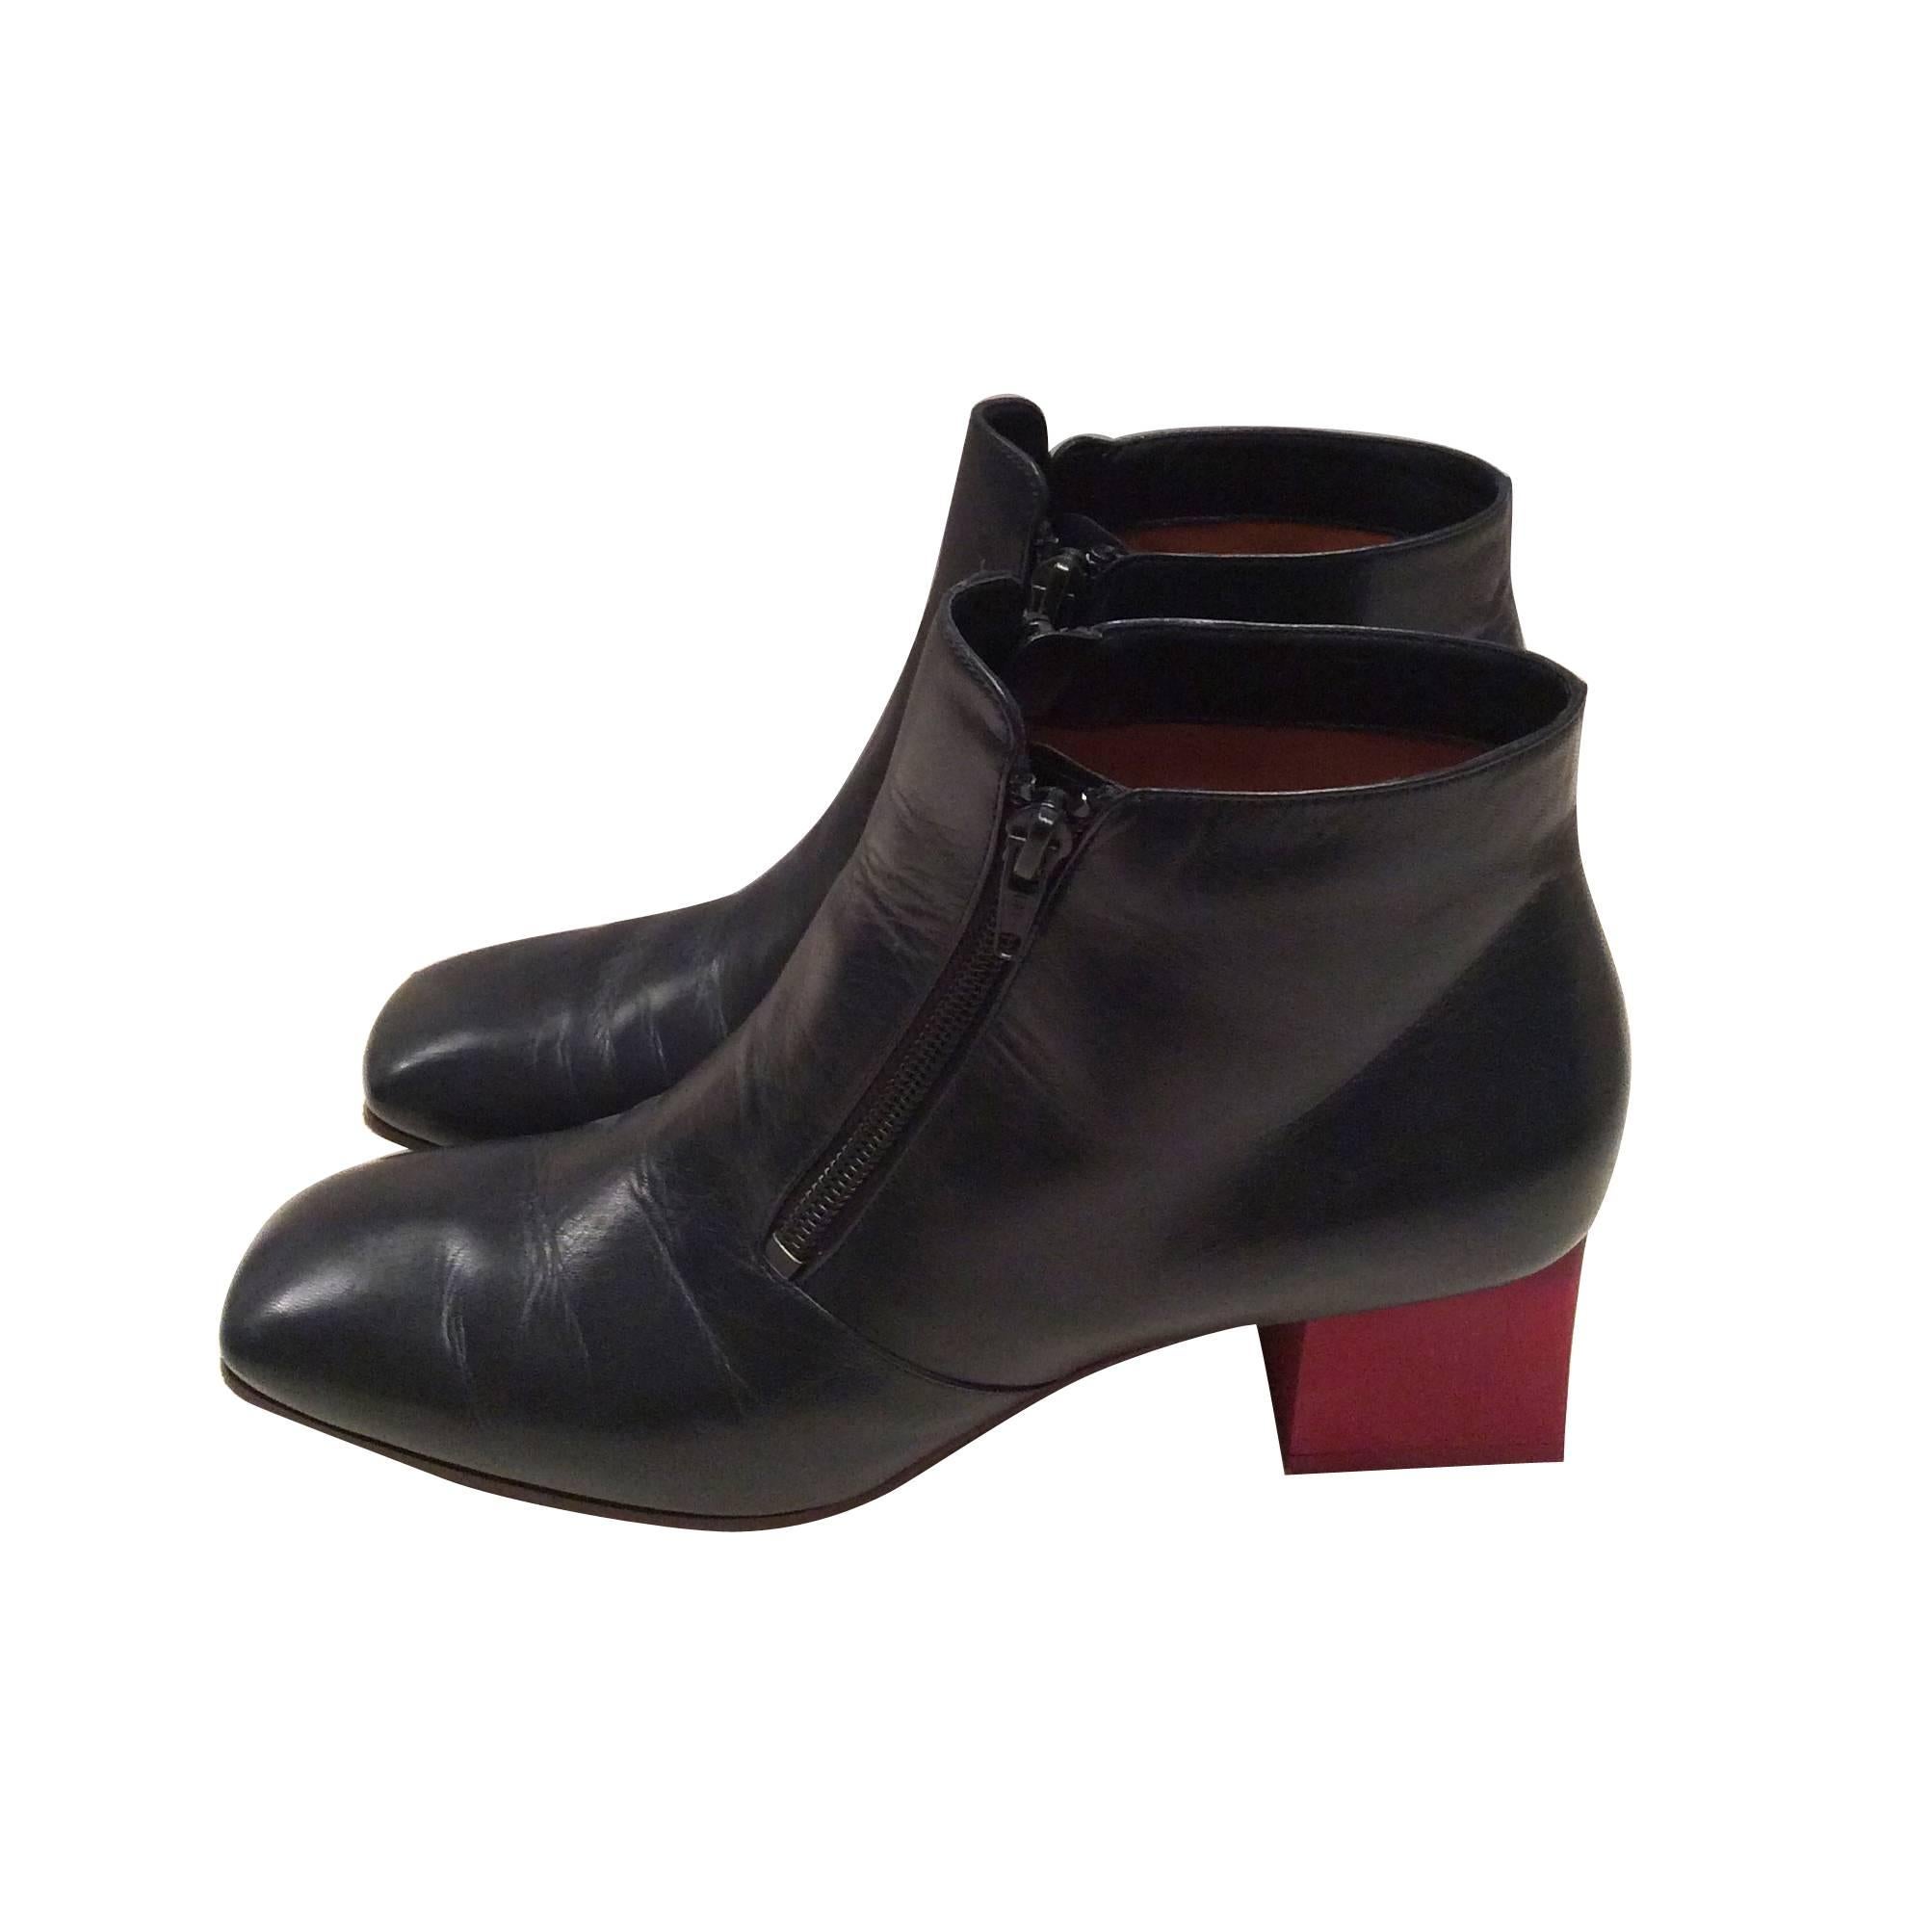 Celine Boots - Short Navy Leather with Red Heel - Size 37.5 For Sale